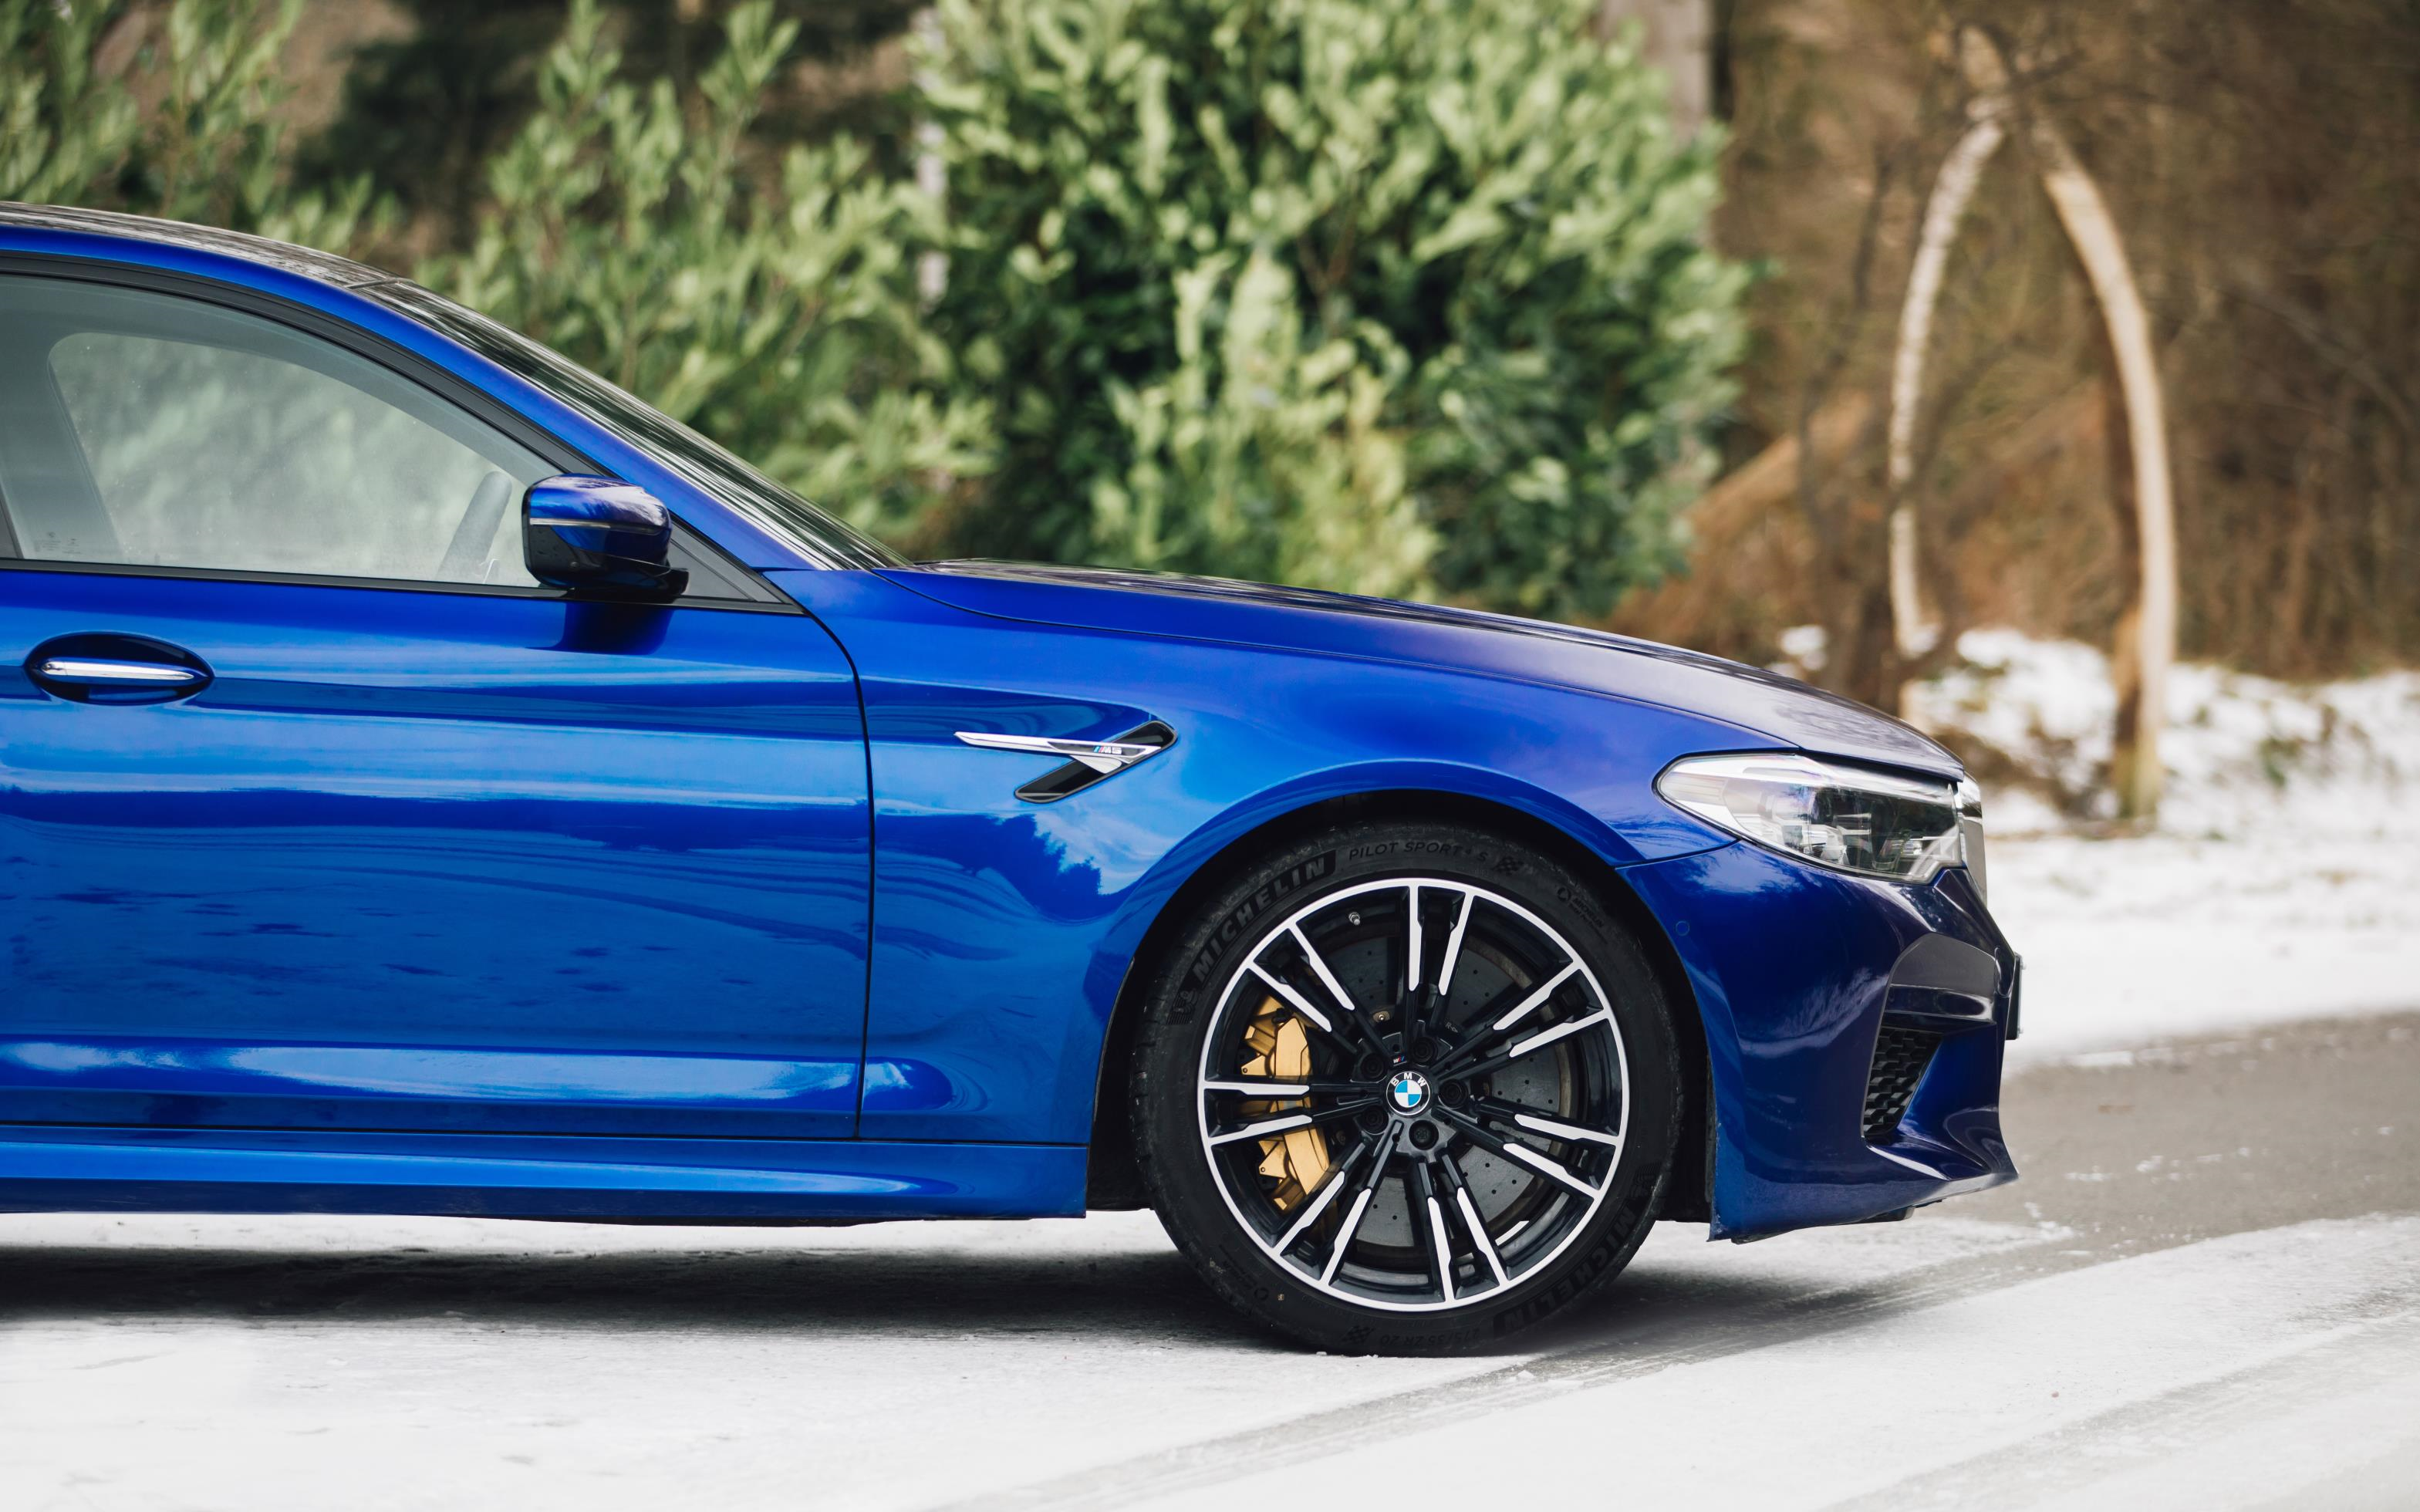 BMW’s ultimate M5 iteration gives traction a fresh set of values - The